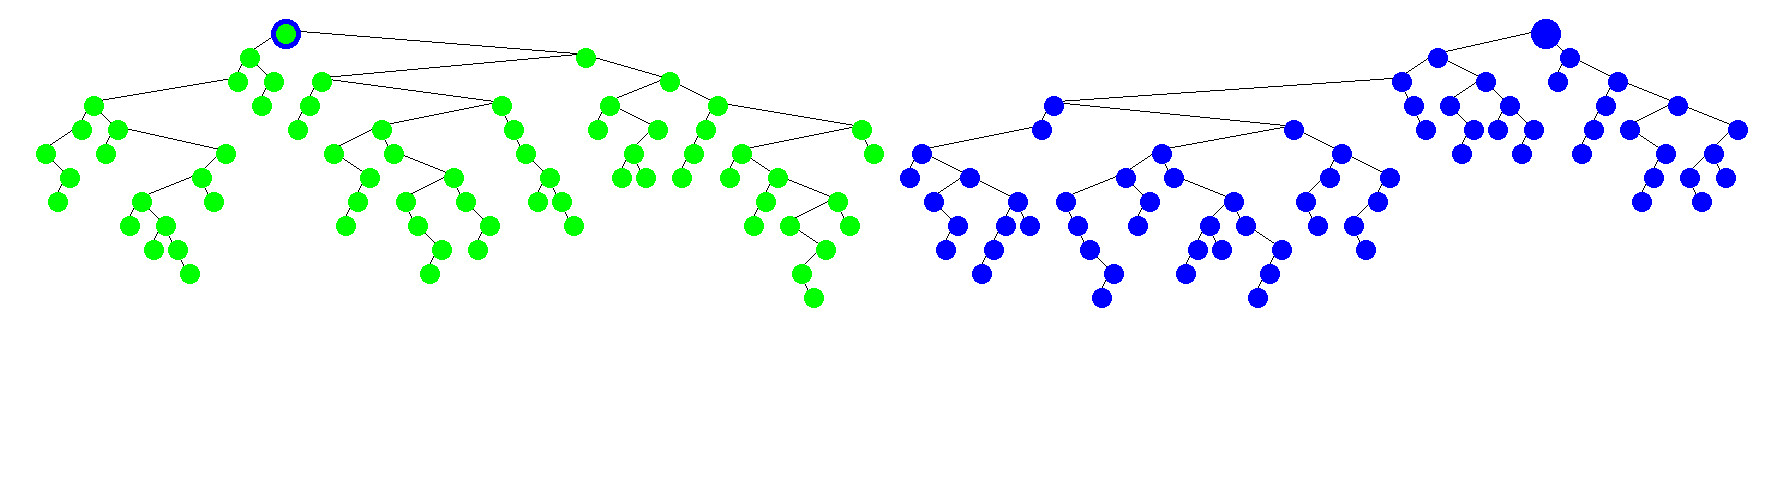 Data Structure Visualization Revisited